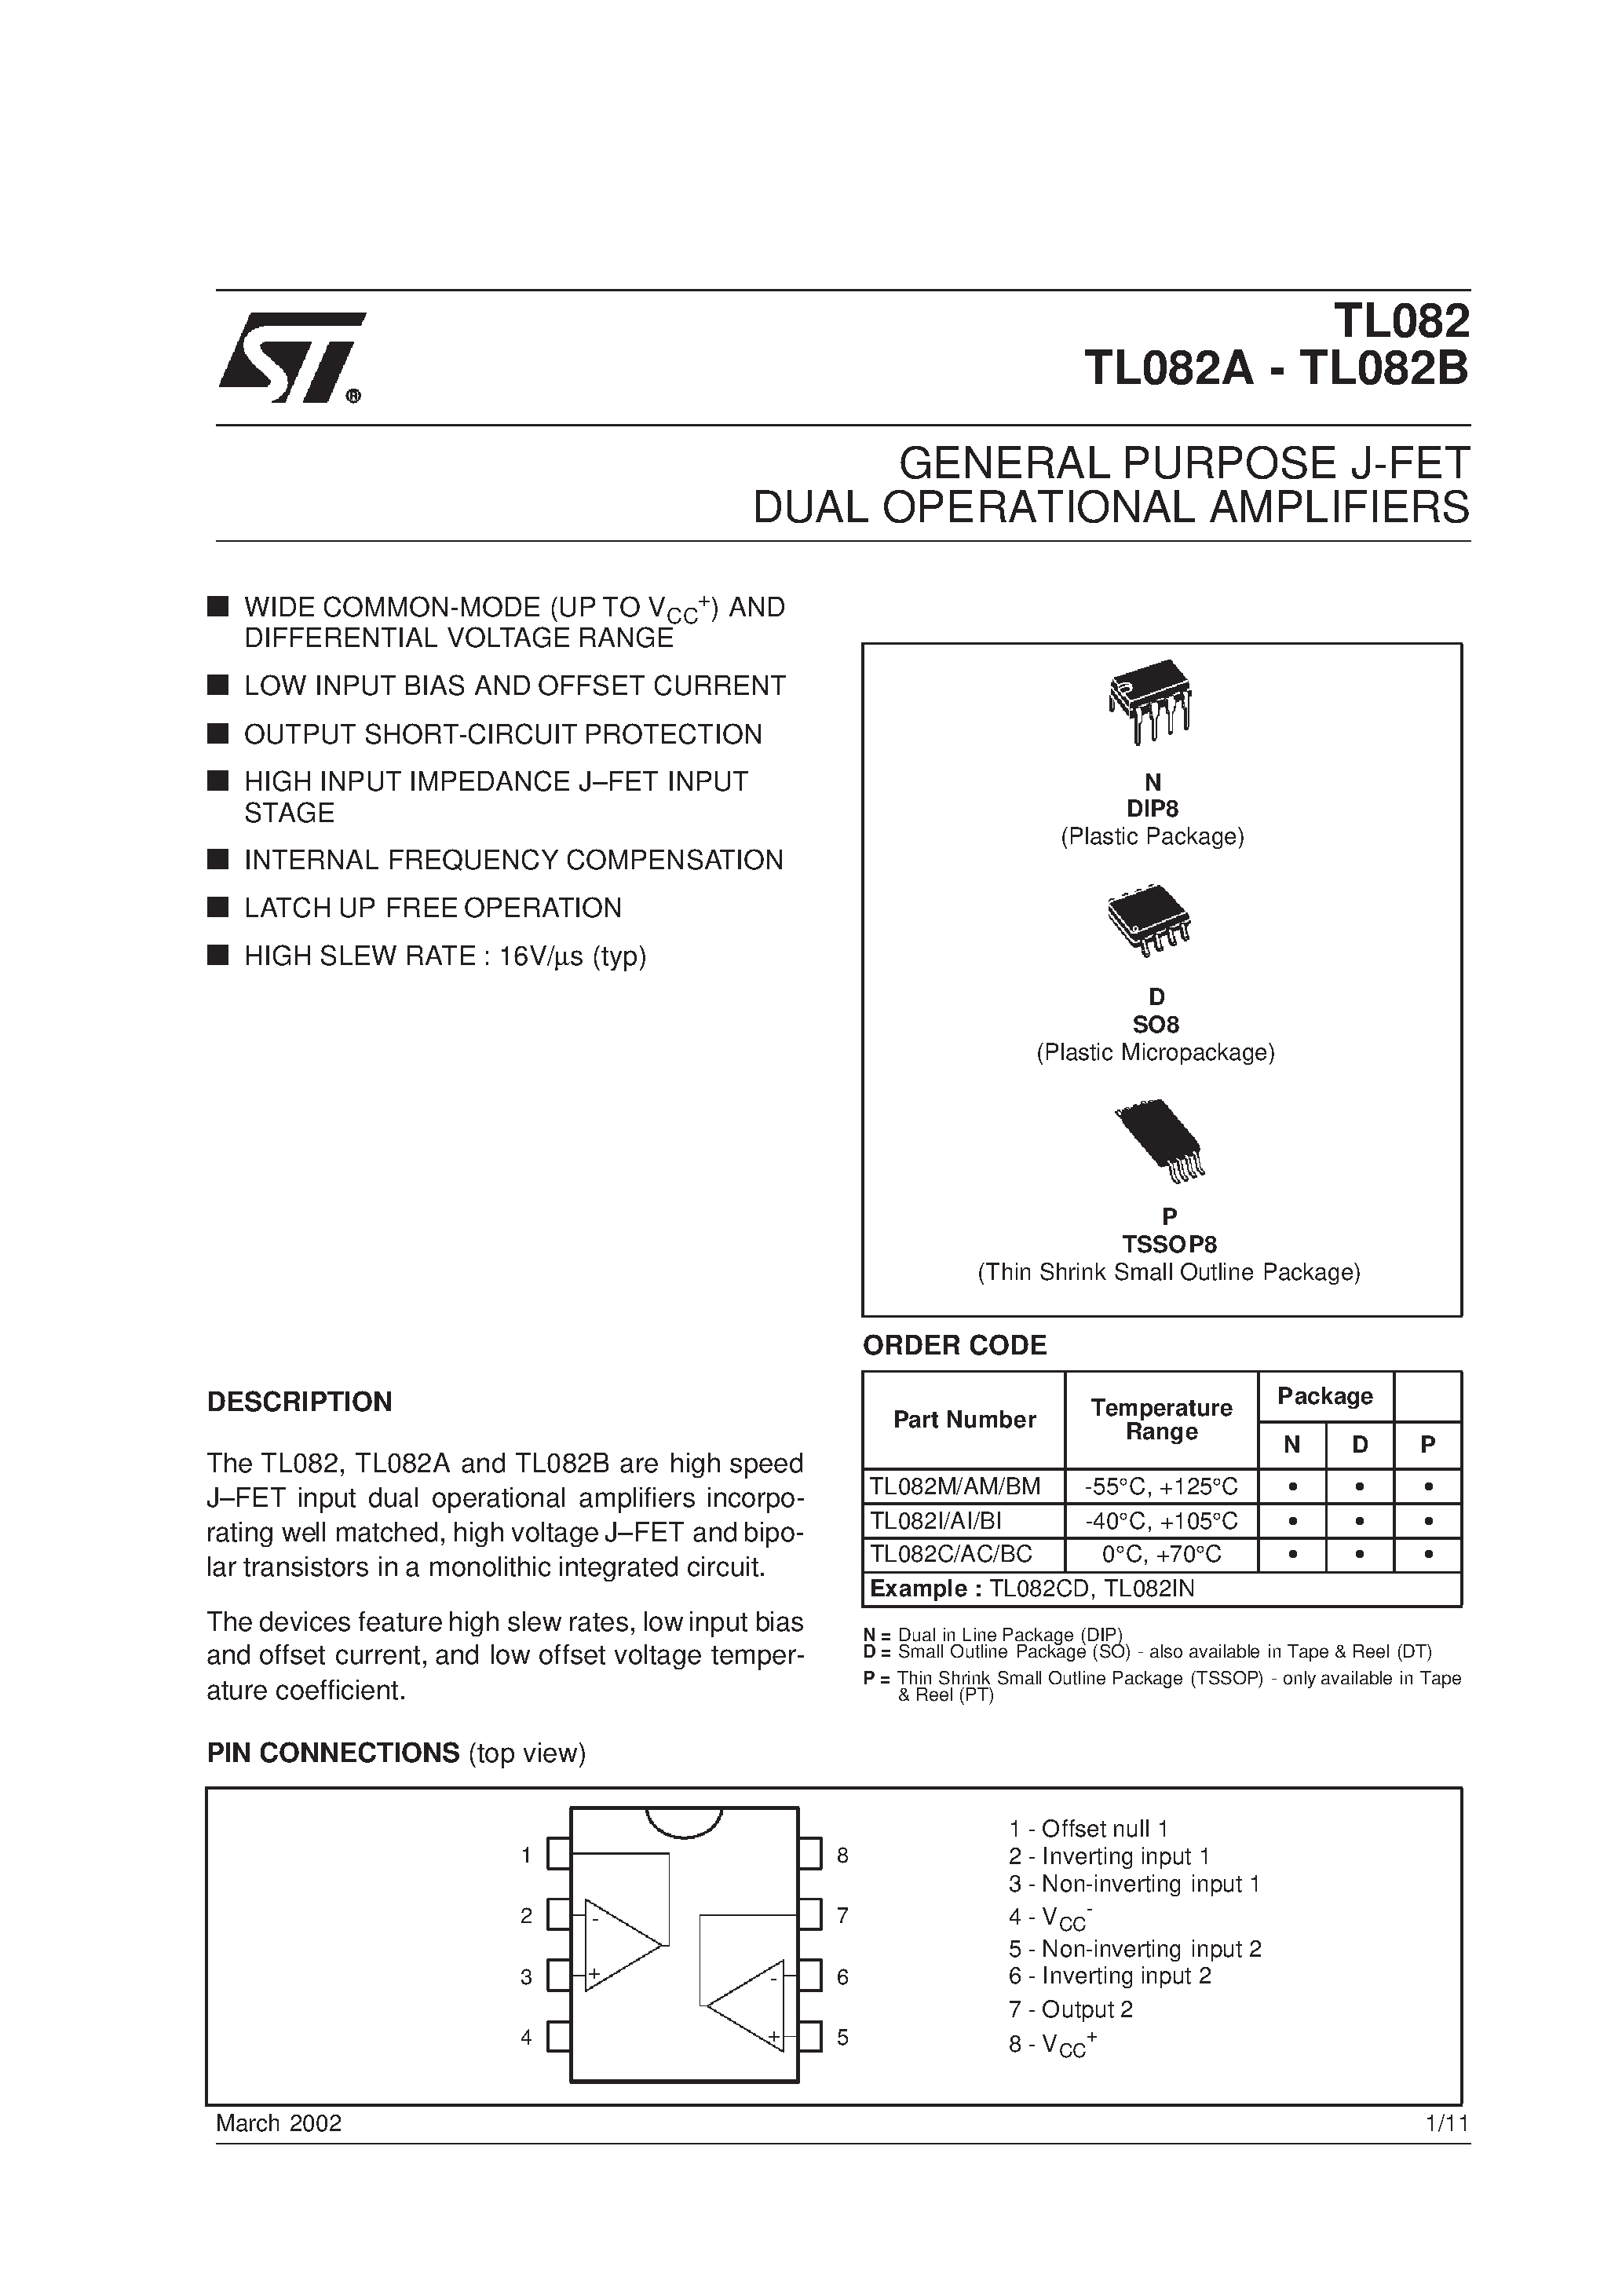 Datasheet TL082BCD - GENERAL PURPOSE J-FET DUAL OPERATIONAL AMPLIFIERS page 1